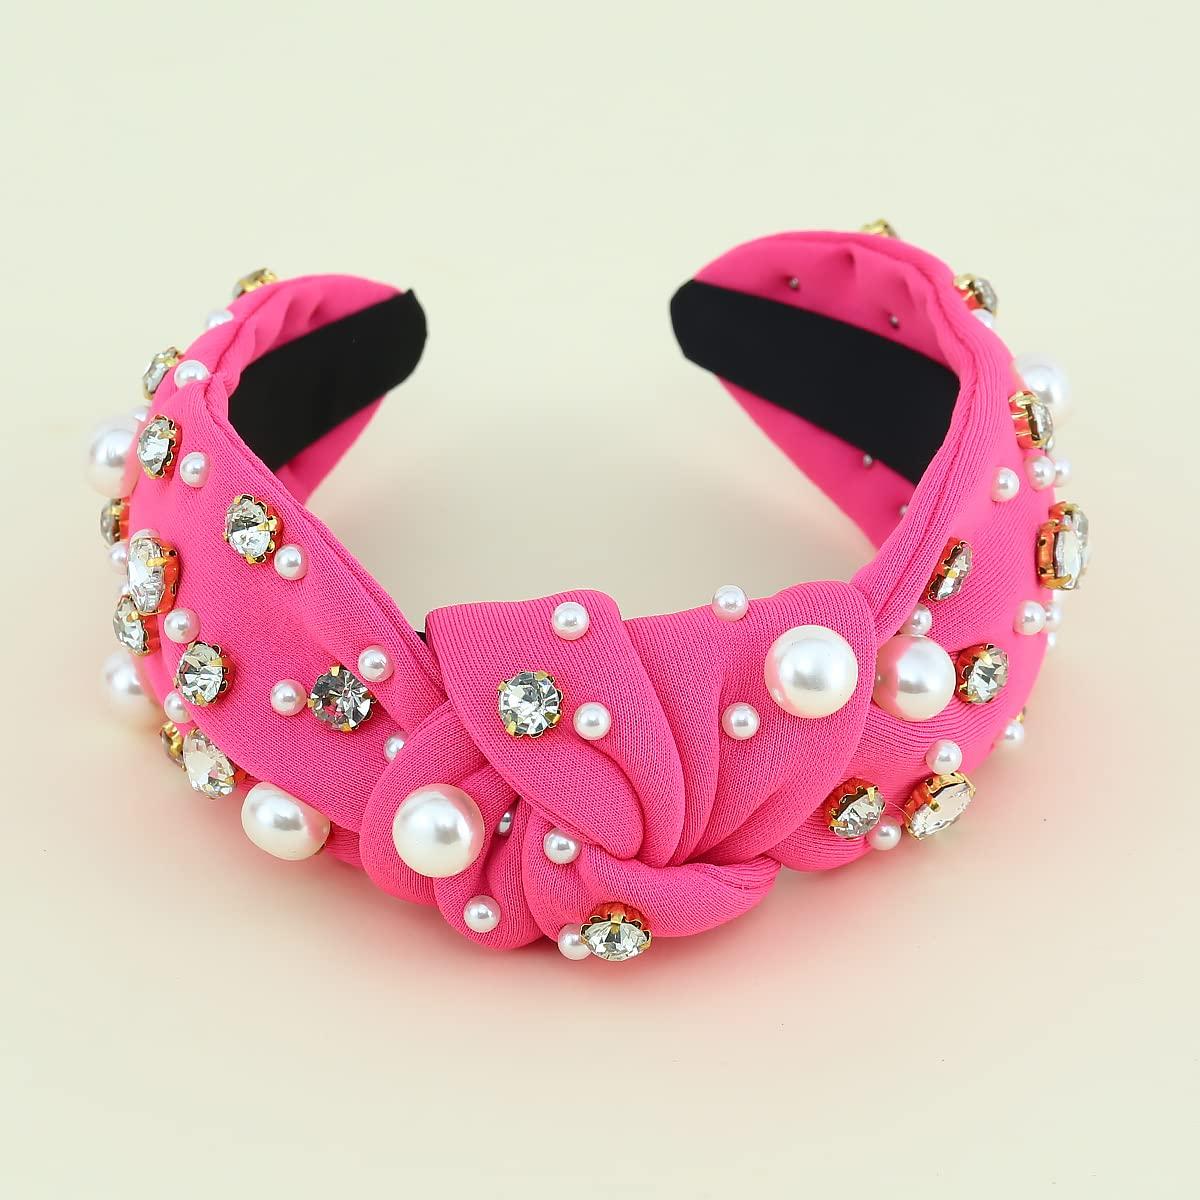 Candy heart headband  Trendy Hair Accessories with - Lush Fashion Lounge